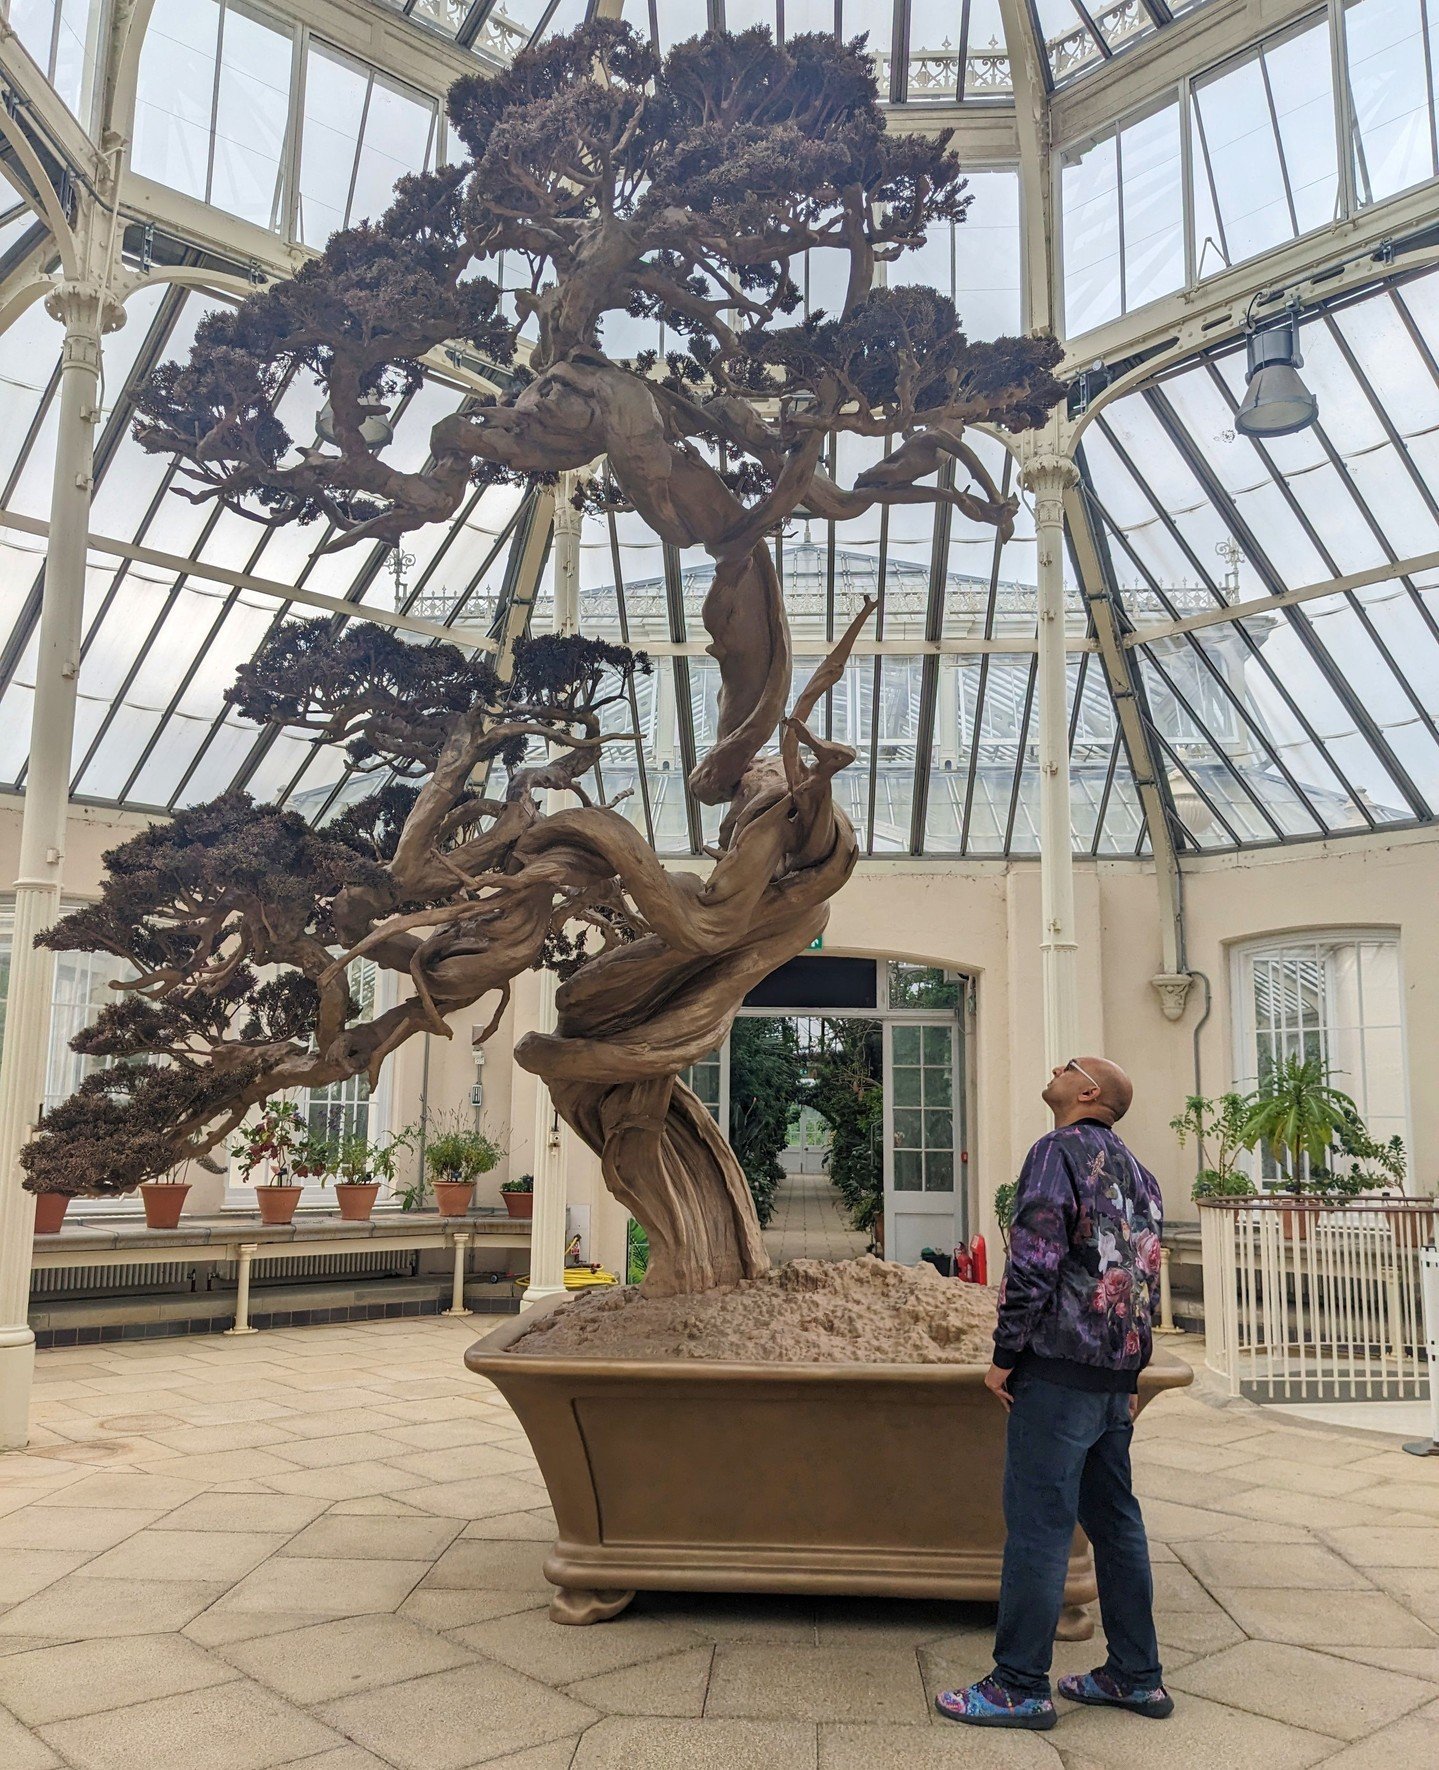 Working closely with the scientists, horticulturalists and botanists at Kew, Marc Quinn has created over 20 artworks, including sculptures based on the medicinal plants that have been used to save human lives &mdash; even as we destroy the forests ma